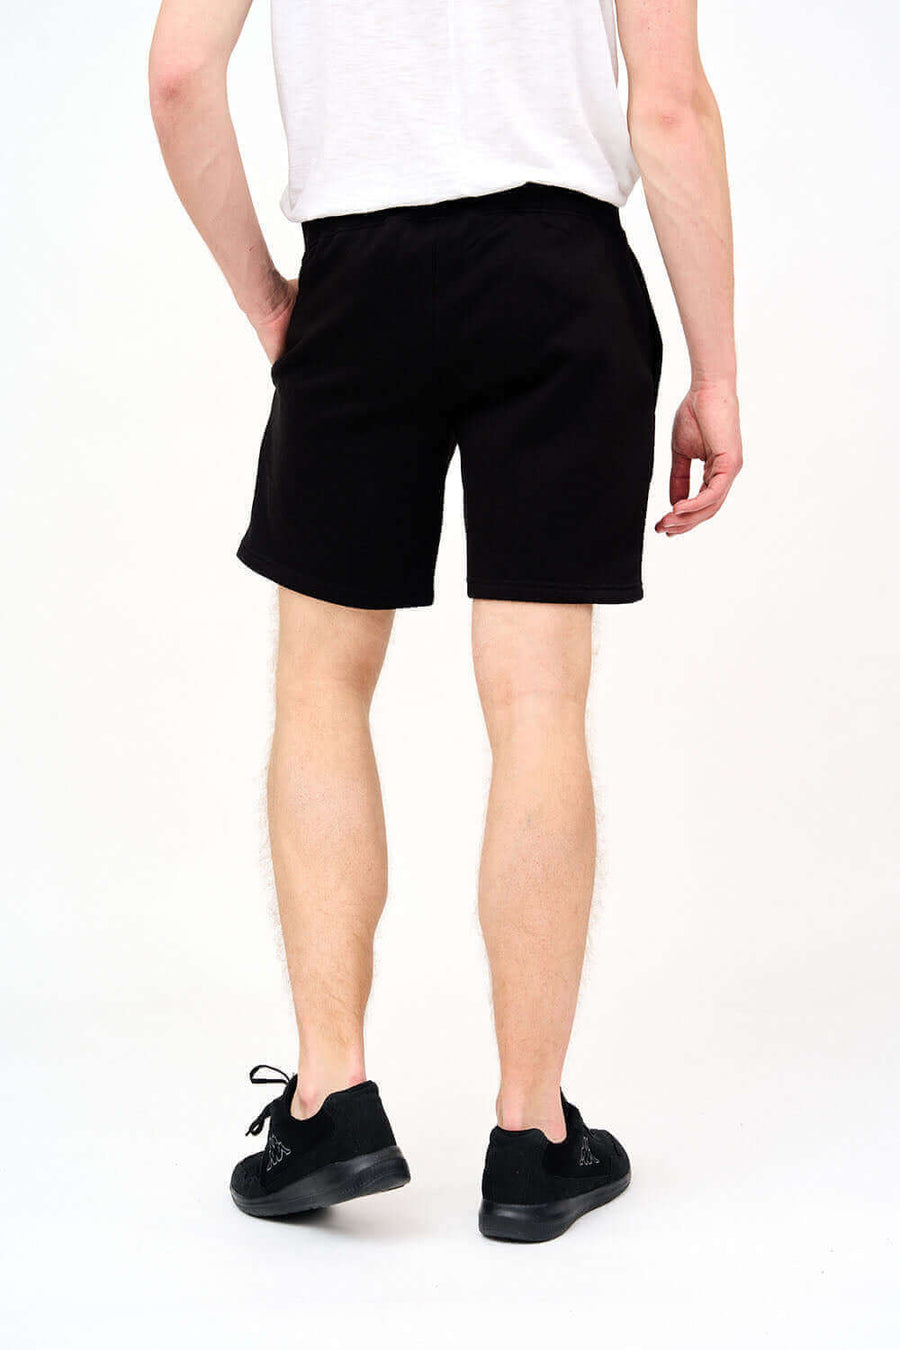 Back View of Flexible Men's Gym Shorts in Black for Your Active Lifestyle